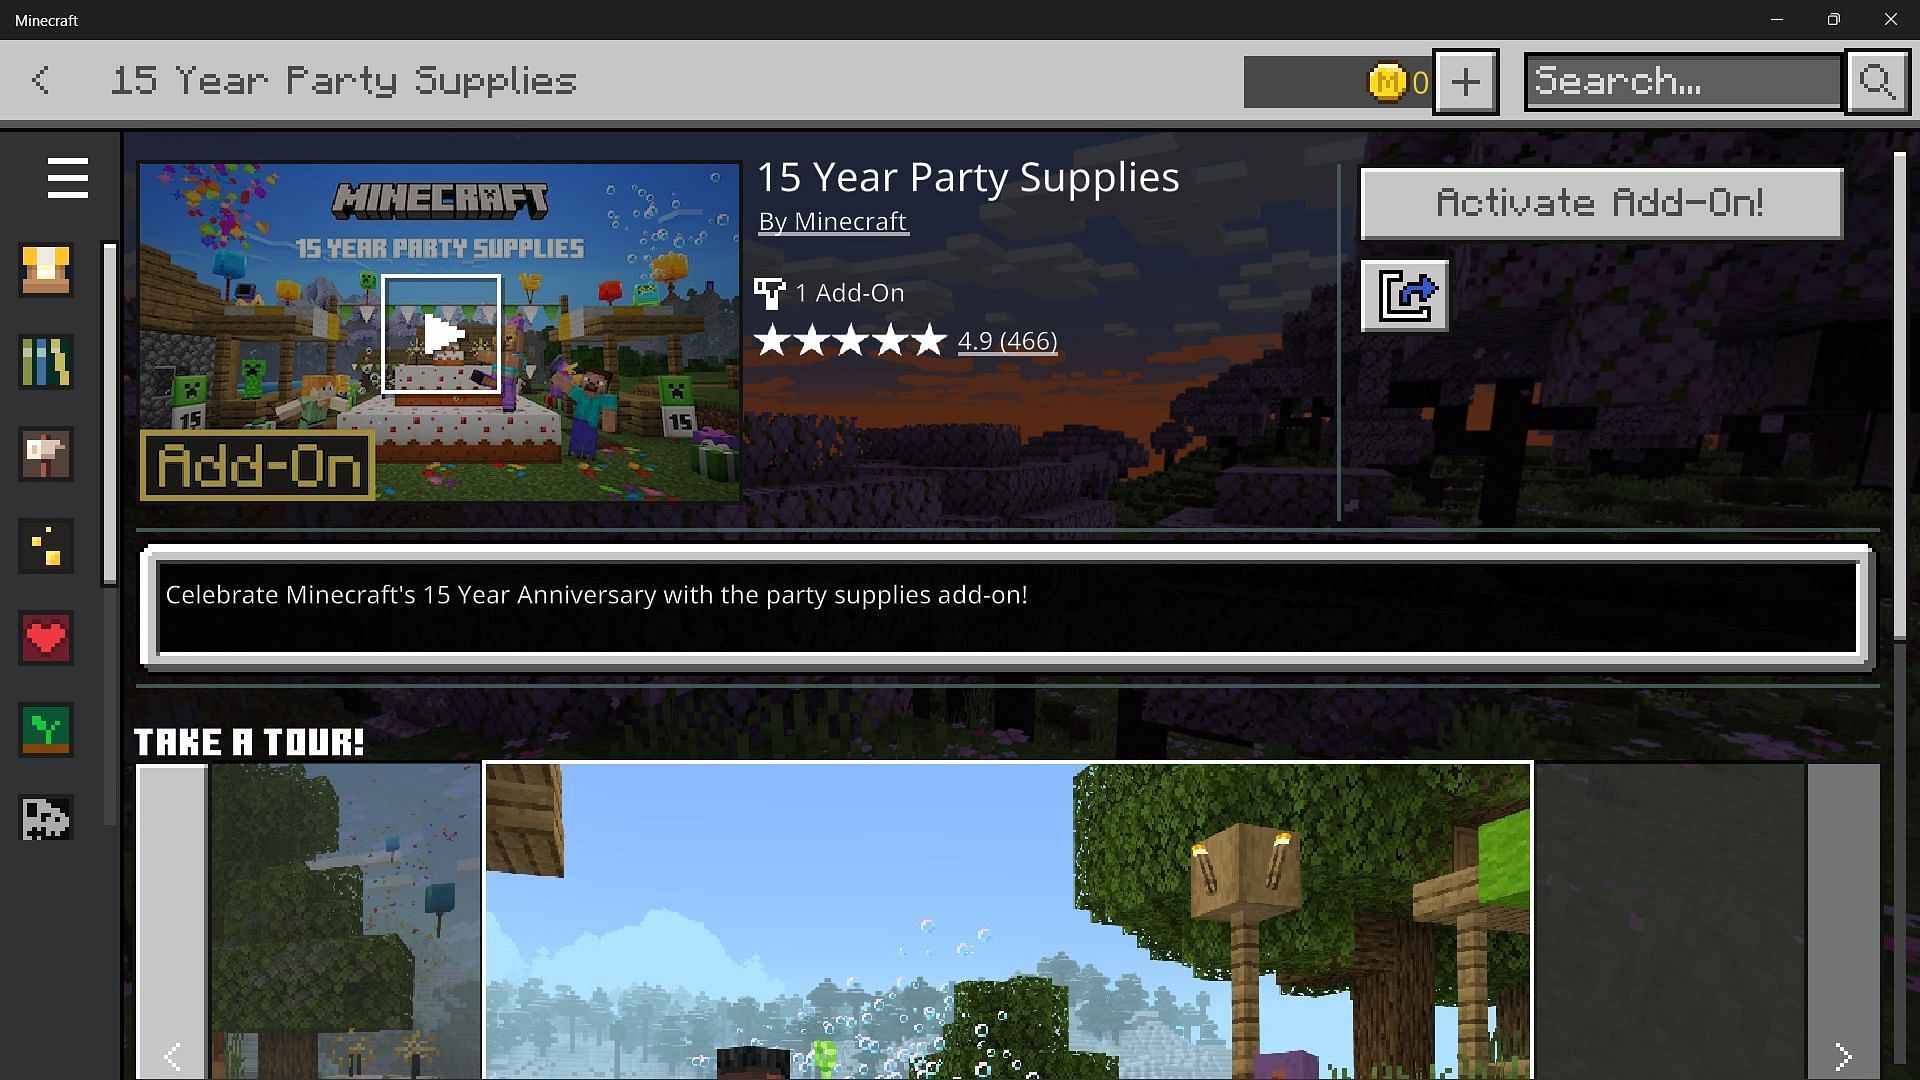 Special add-ons and map should also be available for Java Edition (Image via Mojang Studios)